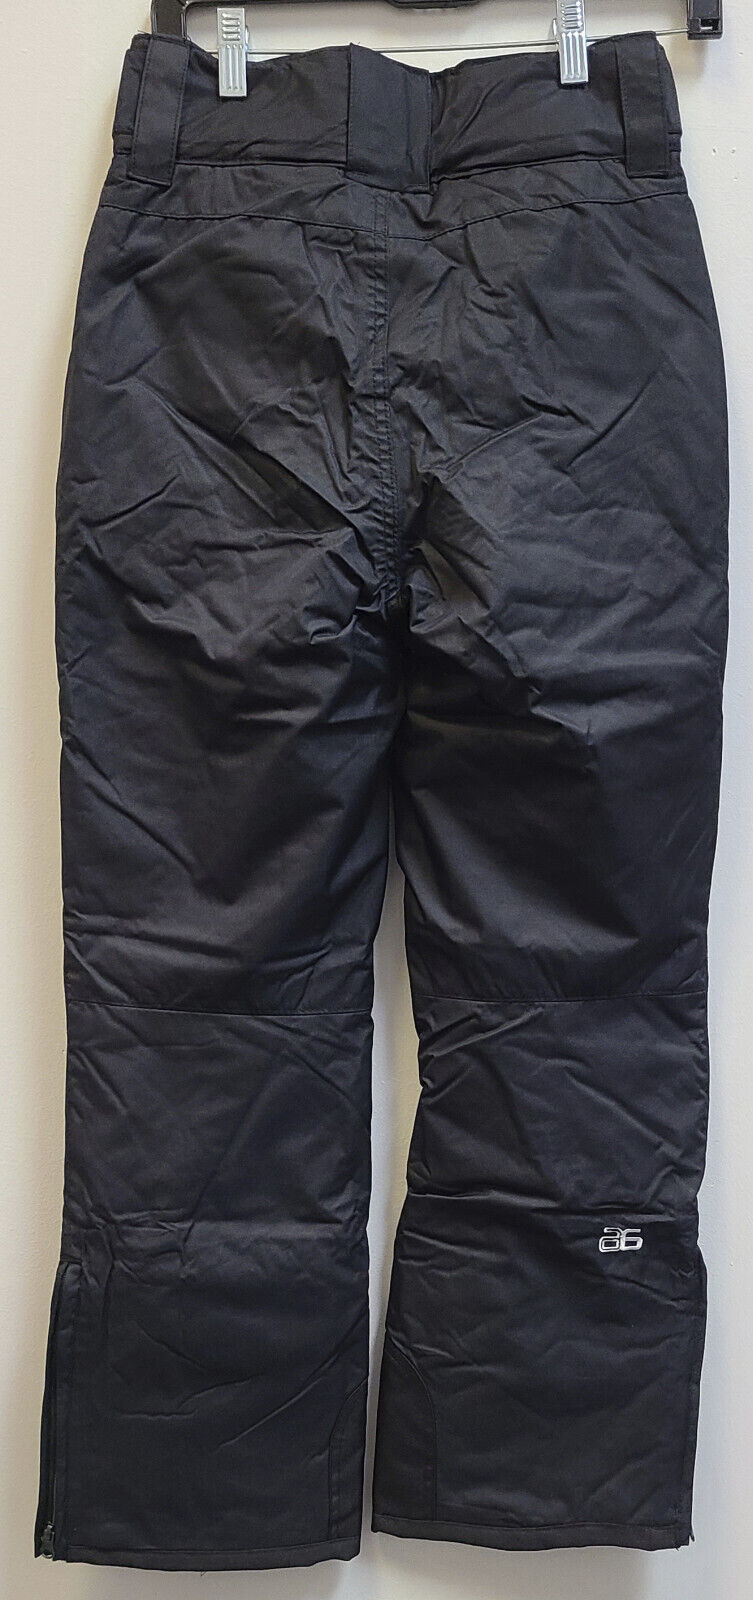 https://calebstreasures.com/wp-content/uploads/imported/1/ARCTIX-Womens-INSULATED-SNOW-PANTS-Size-XS-0-2-Inseam-31-Protects-20F-to-35F-203972966381-3.jpg